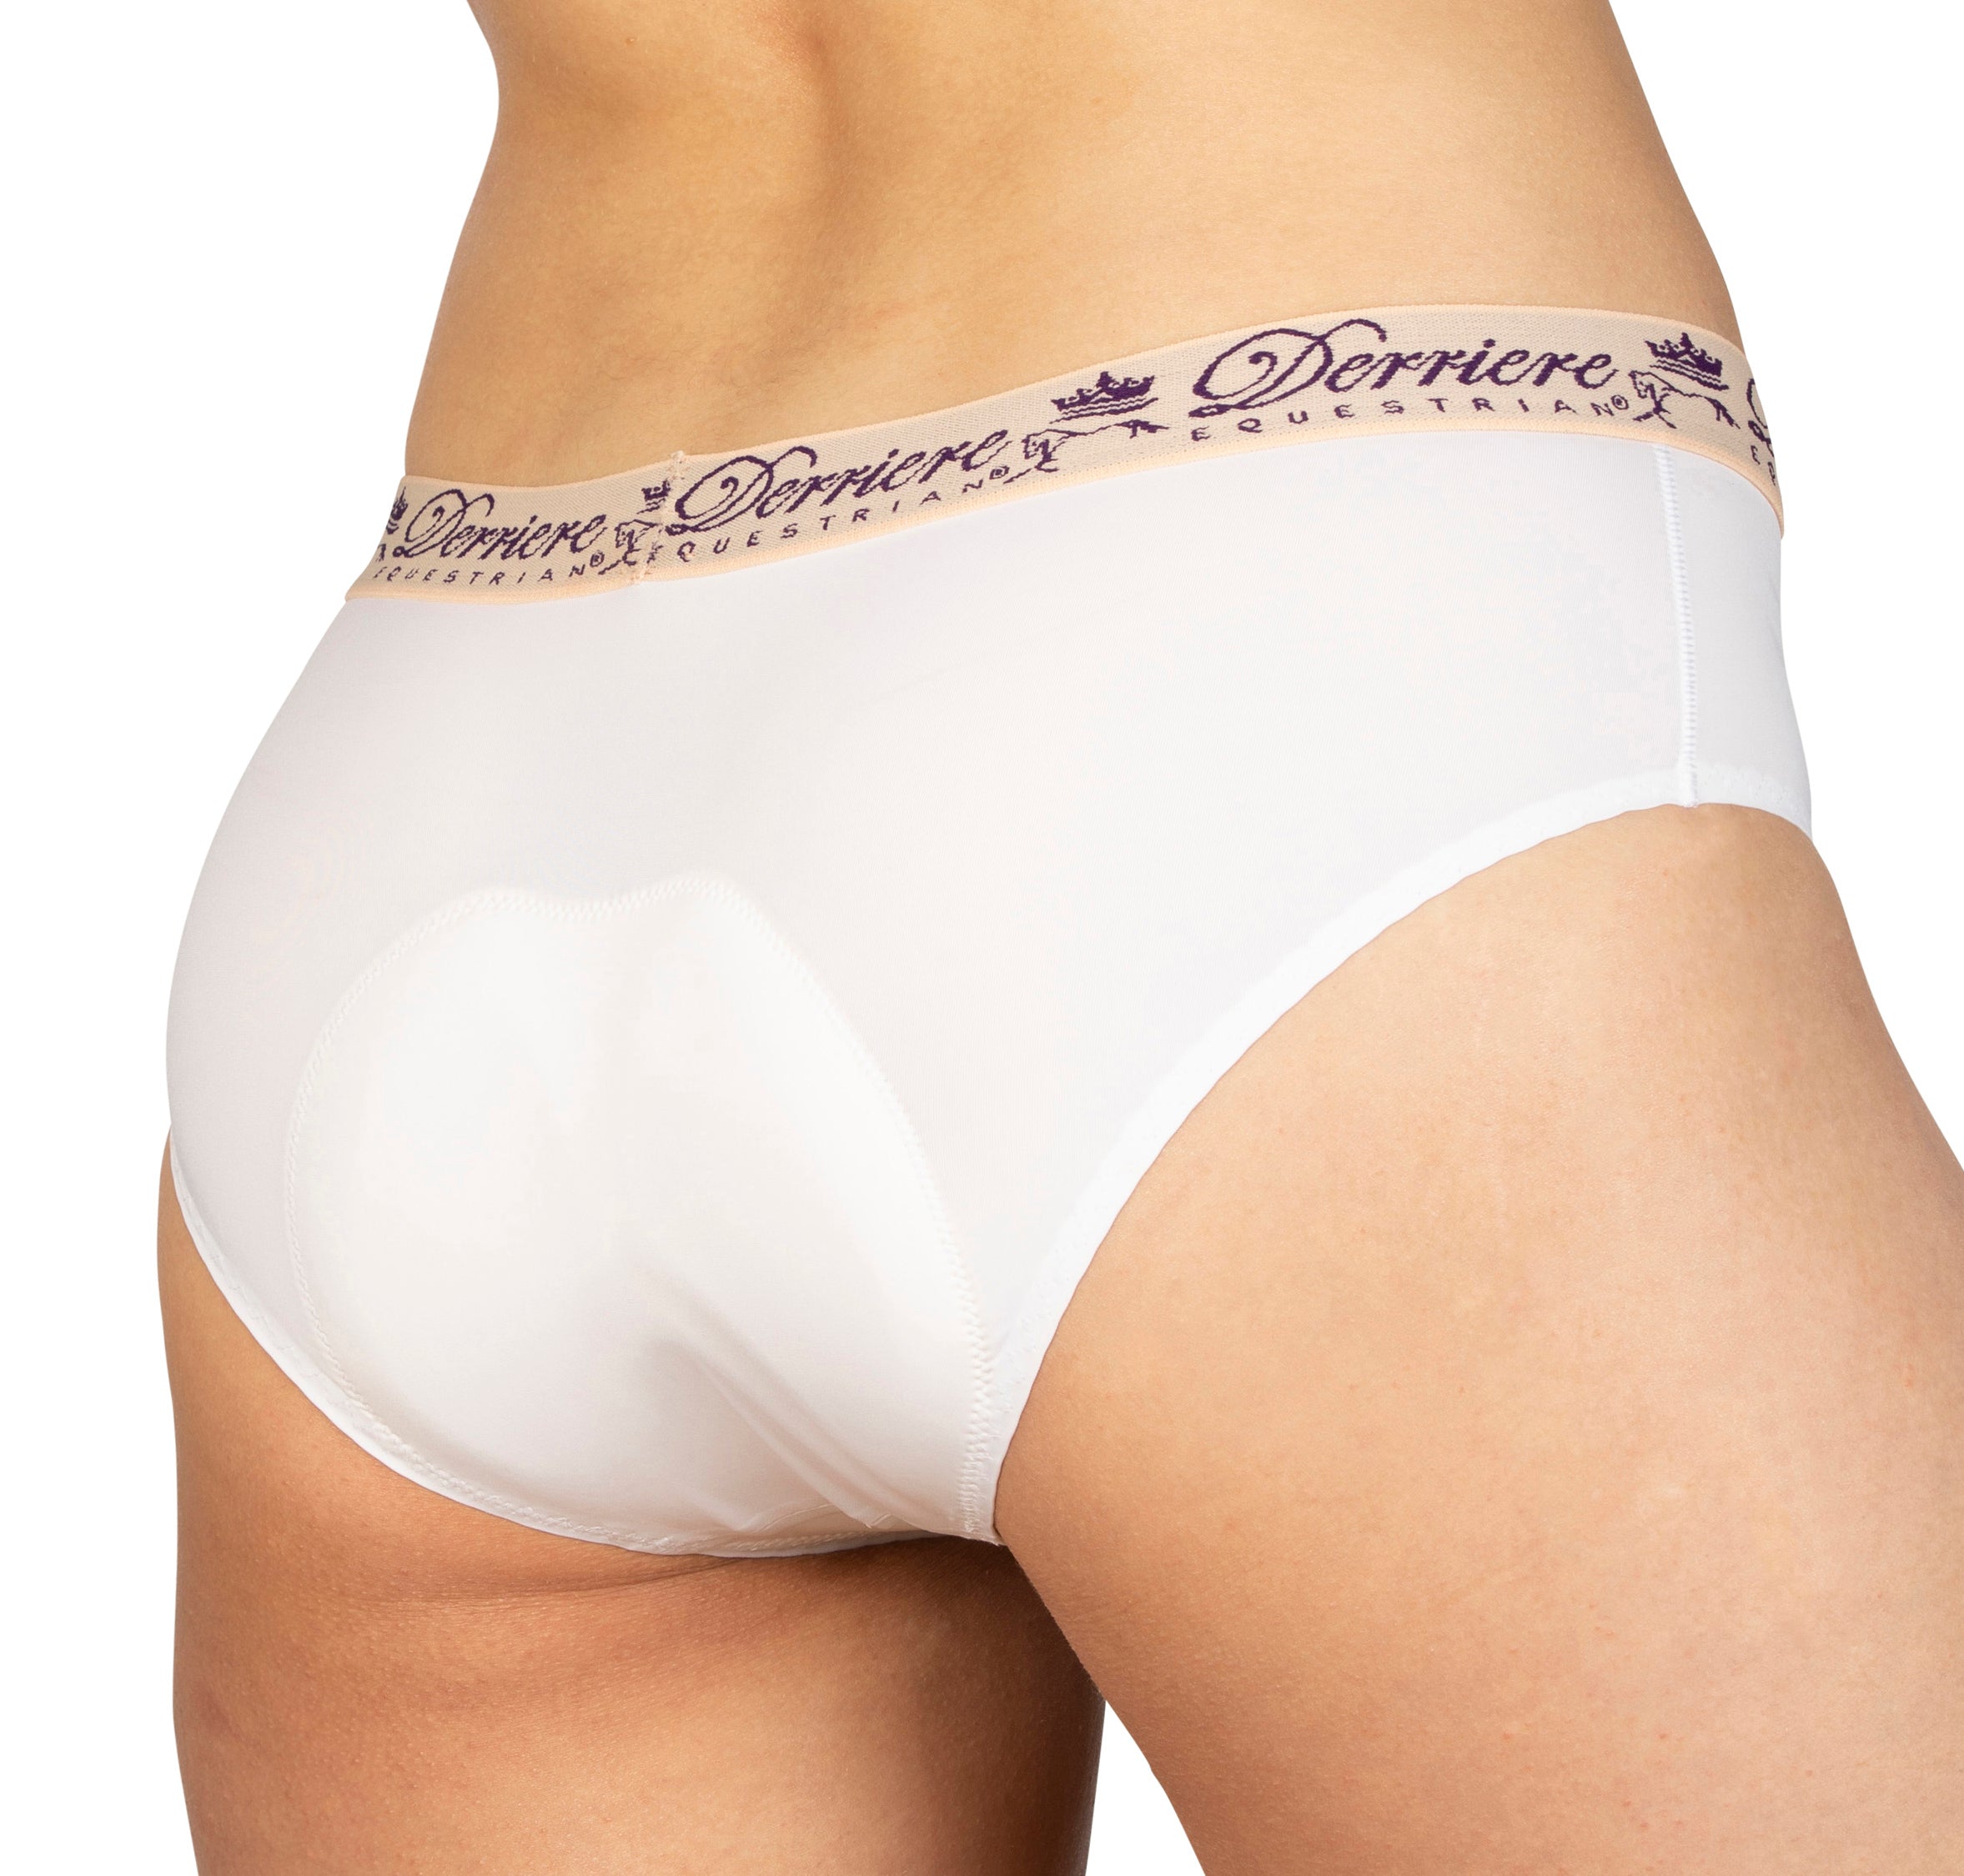 PERFORMANCE PADDED BRIEF – DERRIÈRE